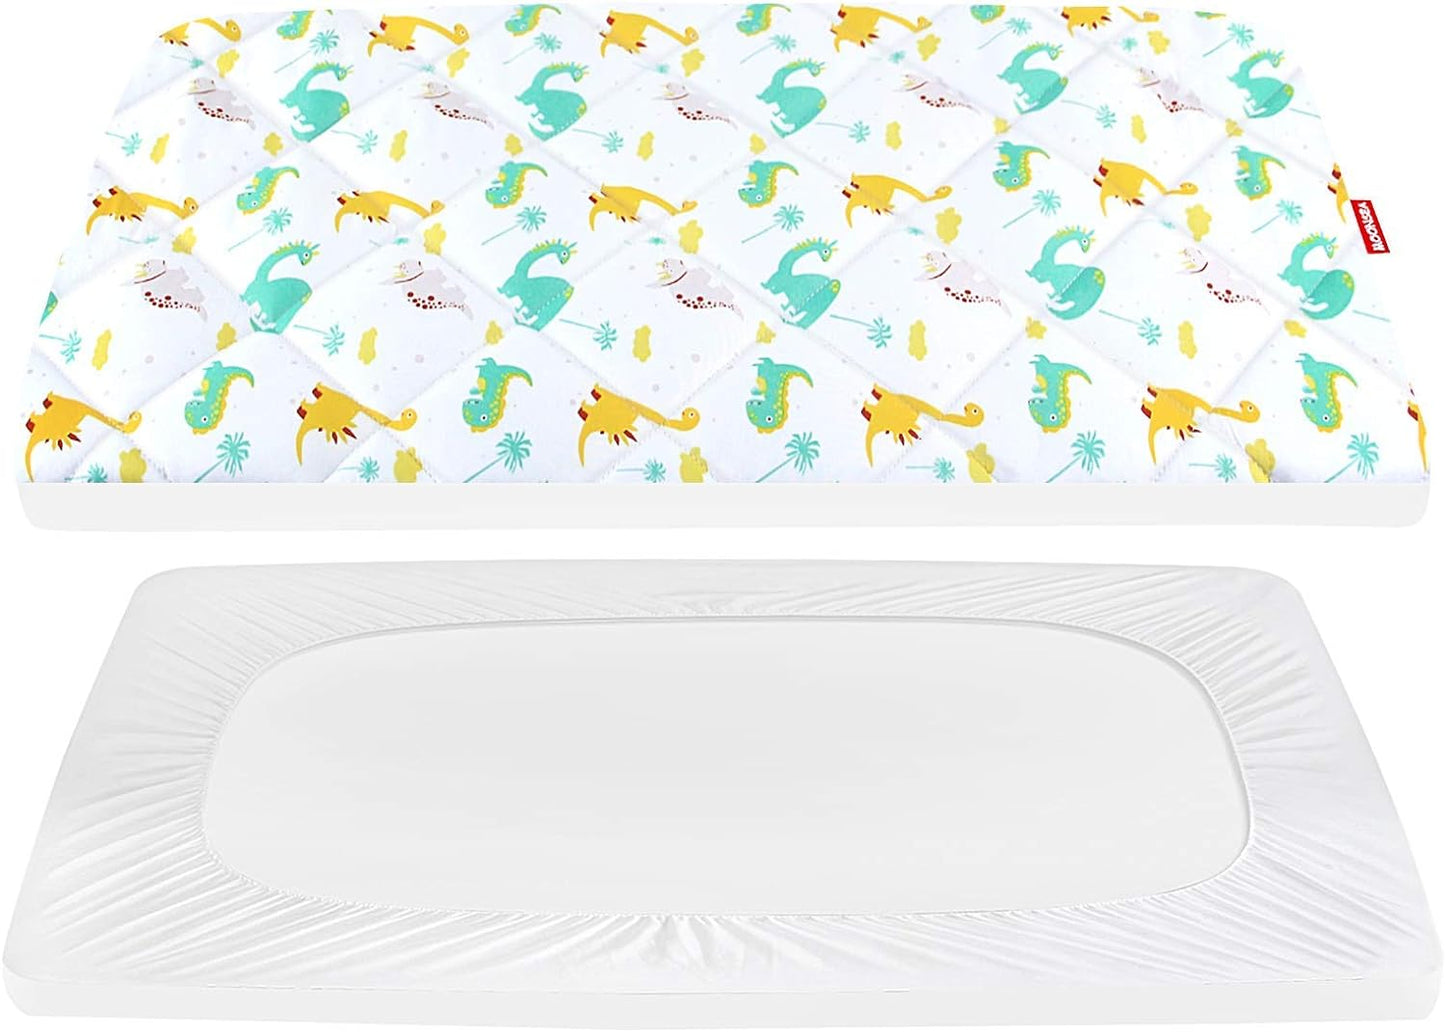 Pack n Play Sheet Quilted | Mini Crib Sheet - Pack and Play Mattress Pad Cover, Ultra-Soft Microfiber, Fits Graco Pack and Play, Dinosaur-Moonsea Bedding